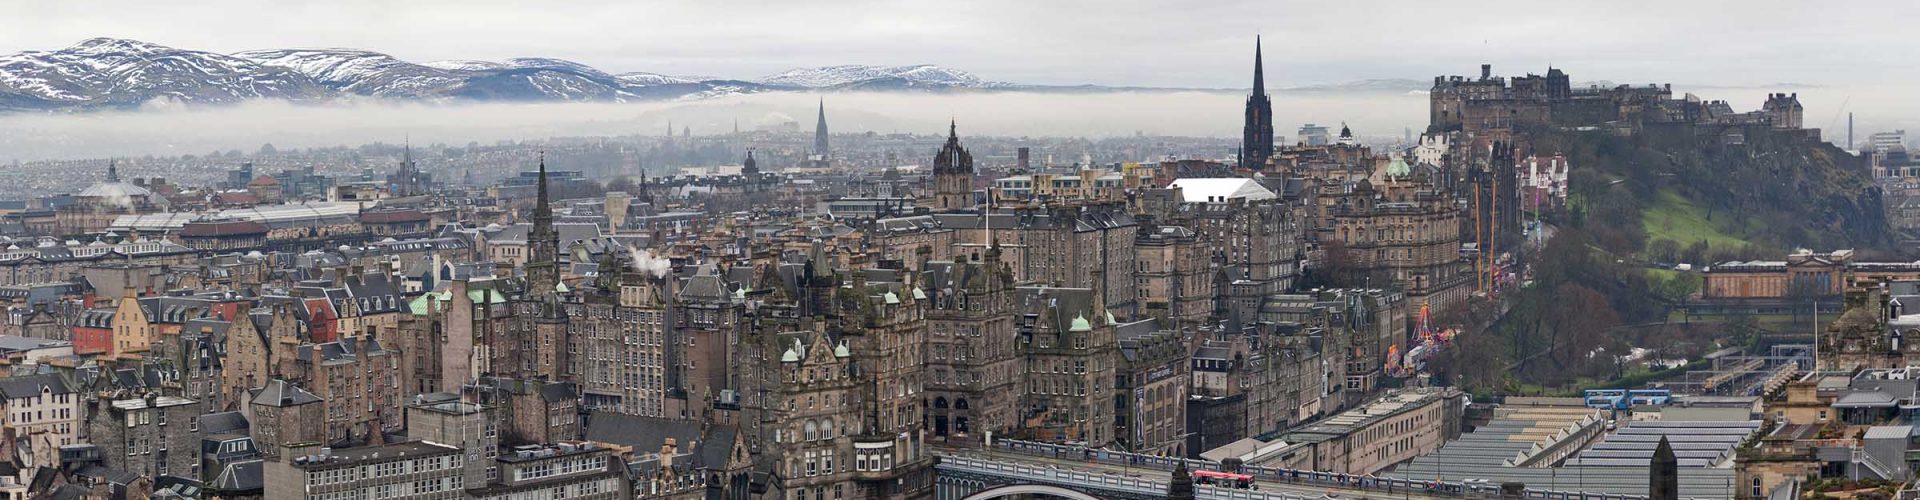 The city of Edinburgh on winters day with snow capped hills in the background